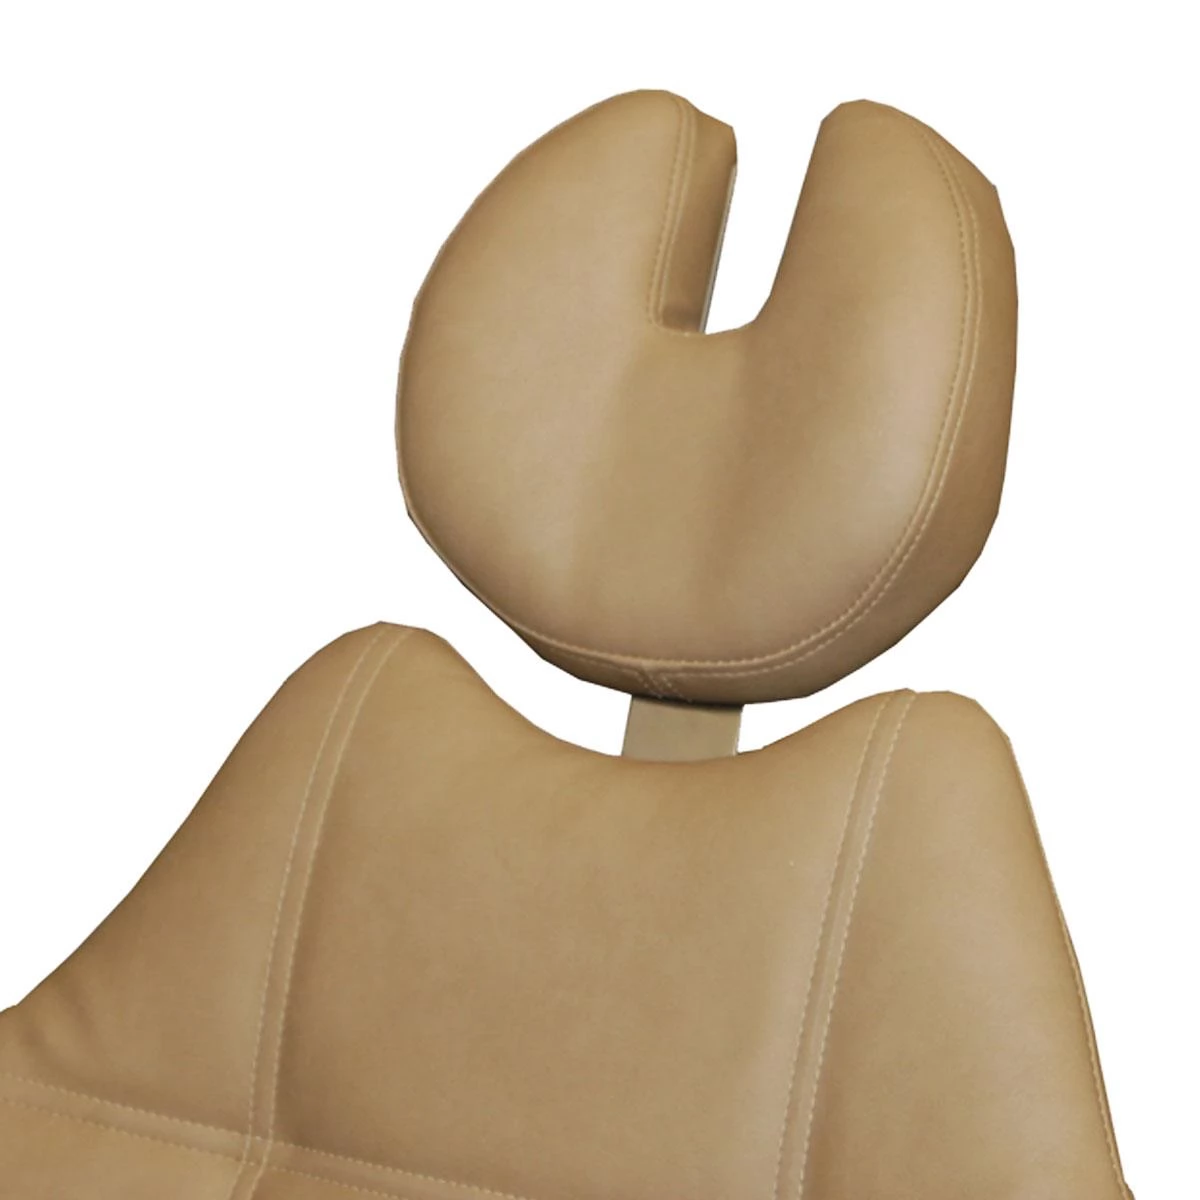 Headrest Photos and Images